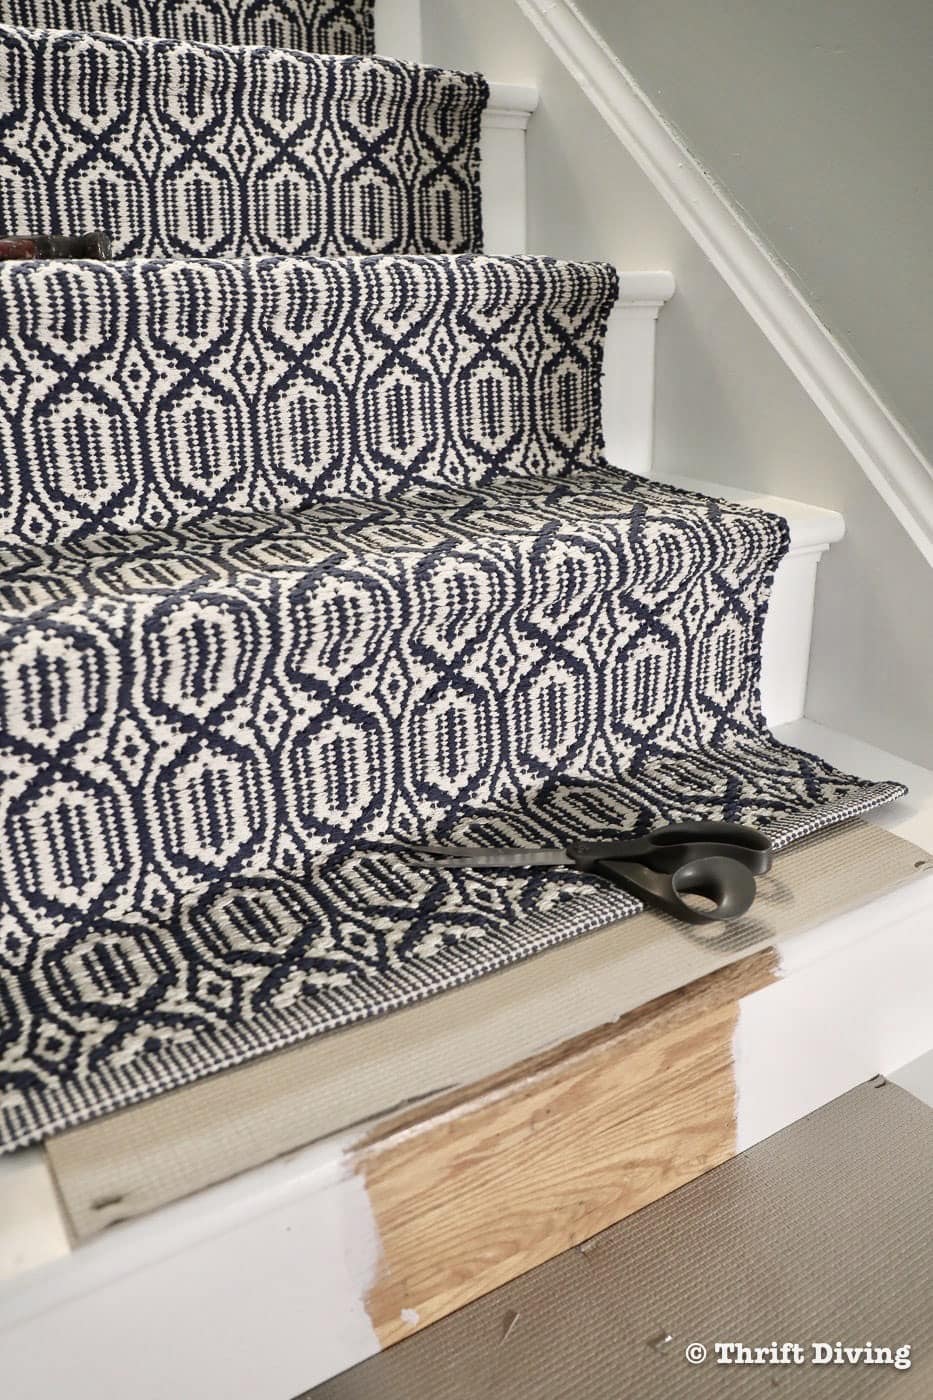 How to Install a Stair Runner - Stair runners are usually not long enough to cover an entire set of stairs. After calculating stairs length, determine how many stair runners you will need. Here's how to join stair runners for a seamless run. - Thrift Diving